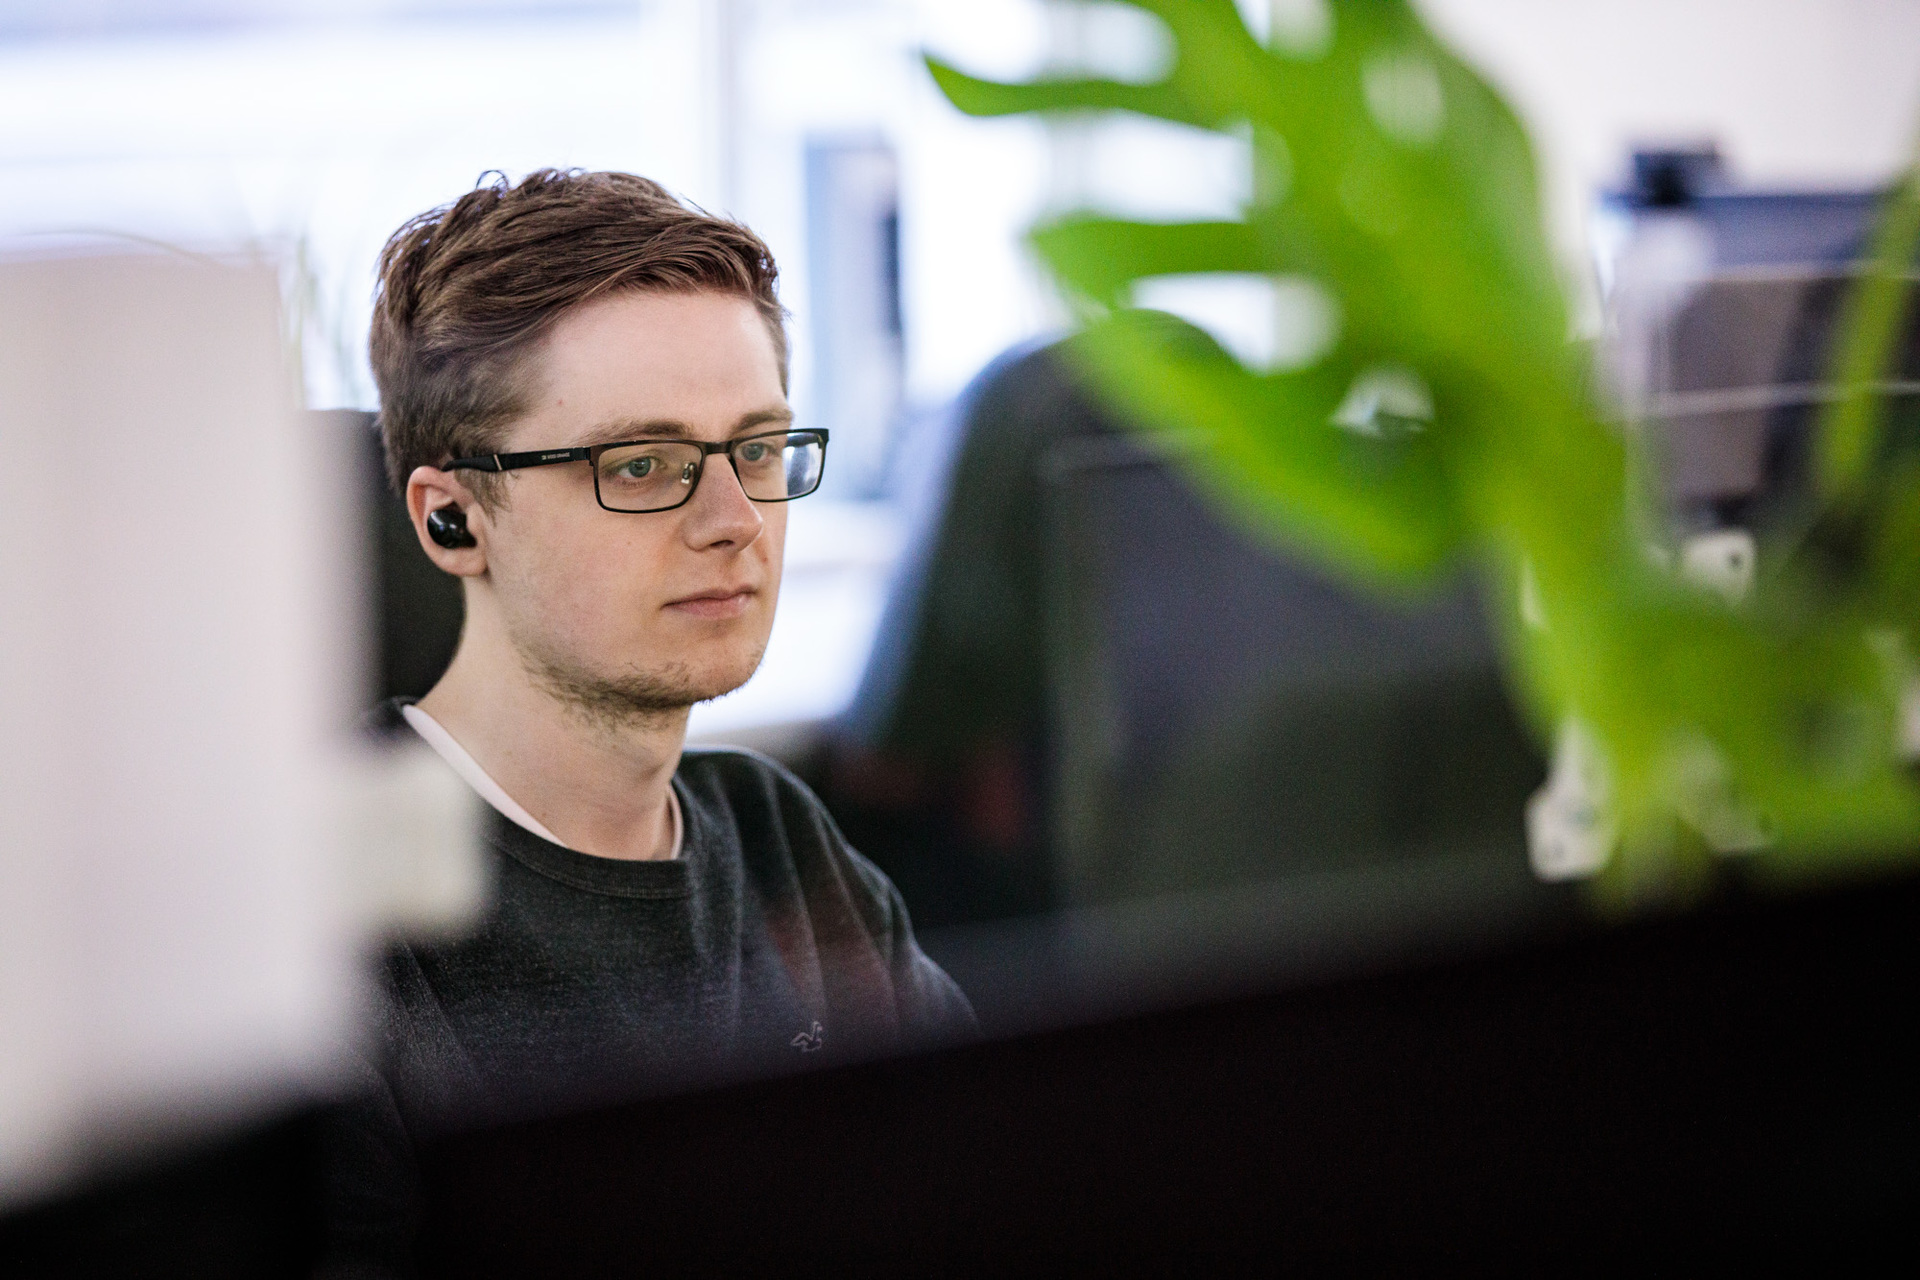 A male web designer with earphones in staring at his desktop computer